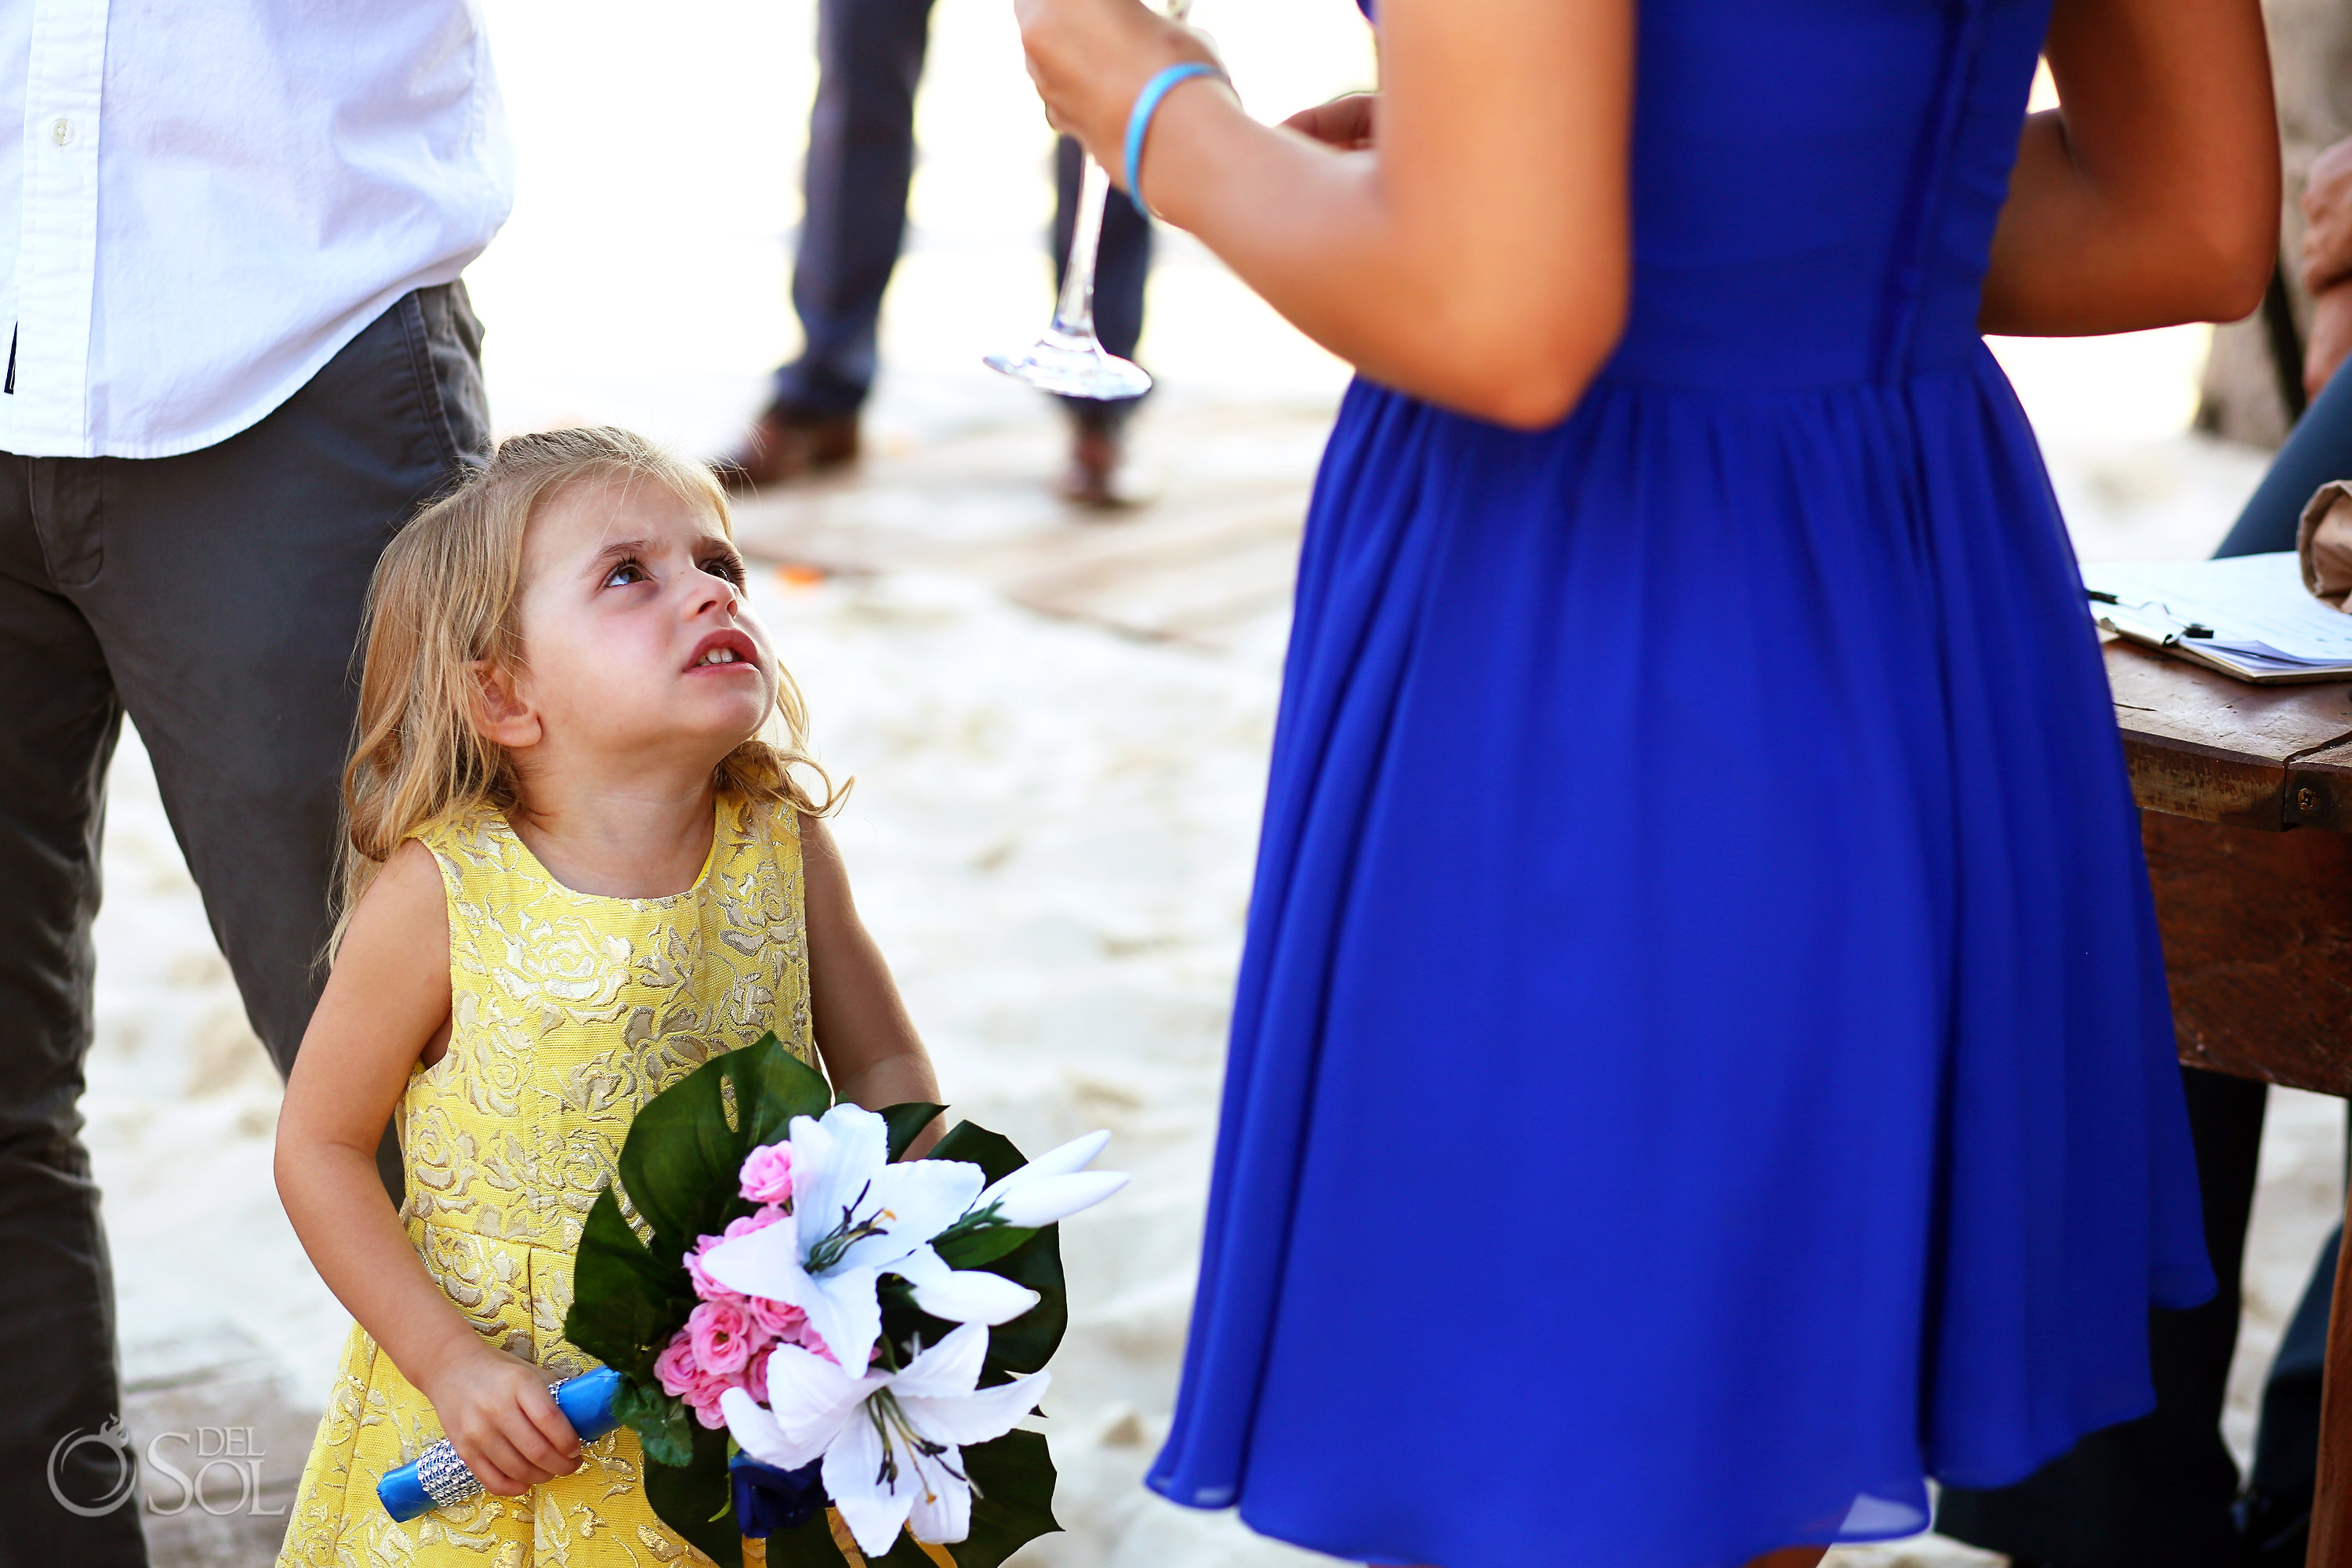 Funny wedding photo, little girl looking angry holding bridesmaid's bouquet Iberostar Paraiso del Mar Wedding